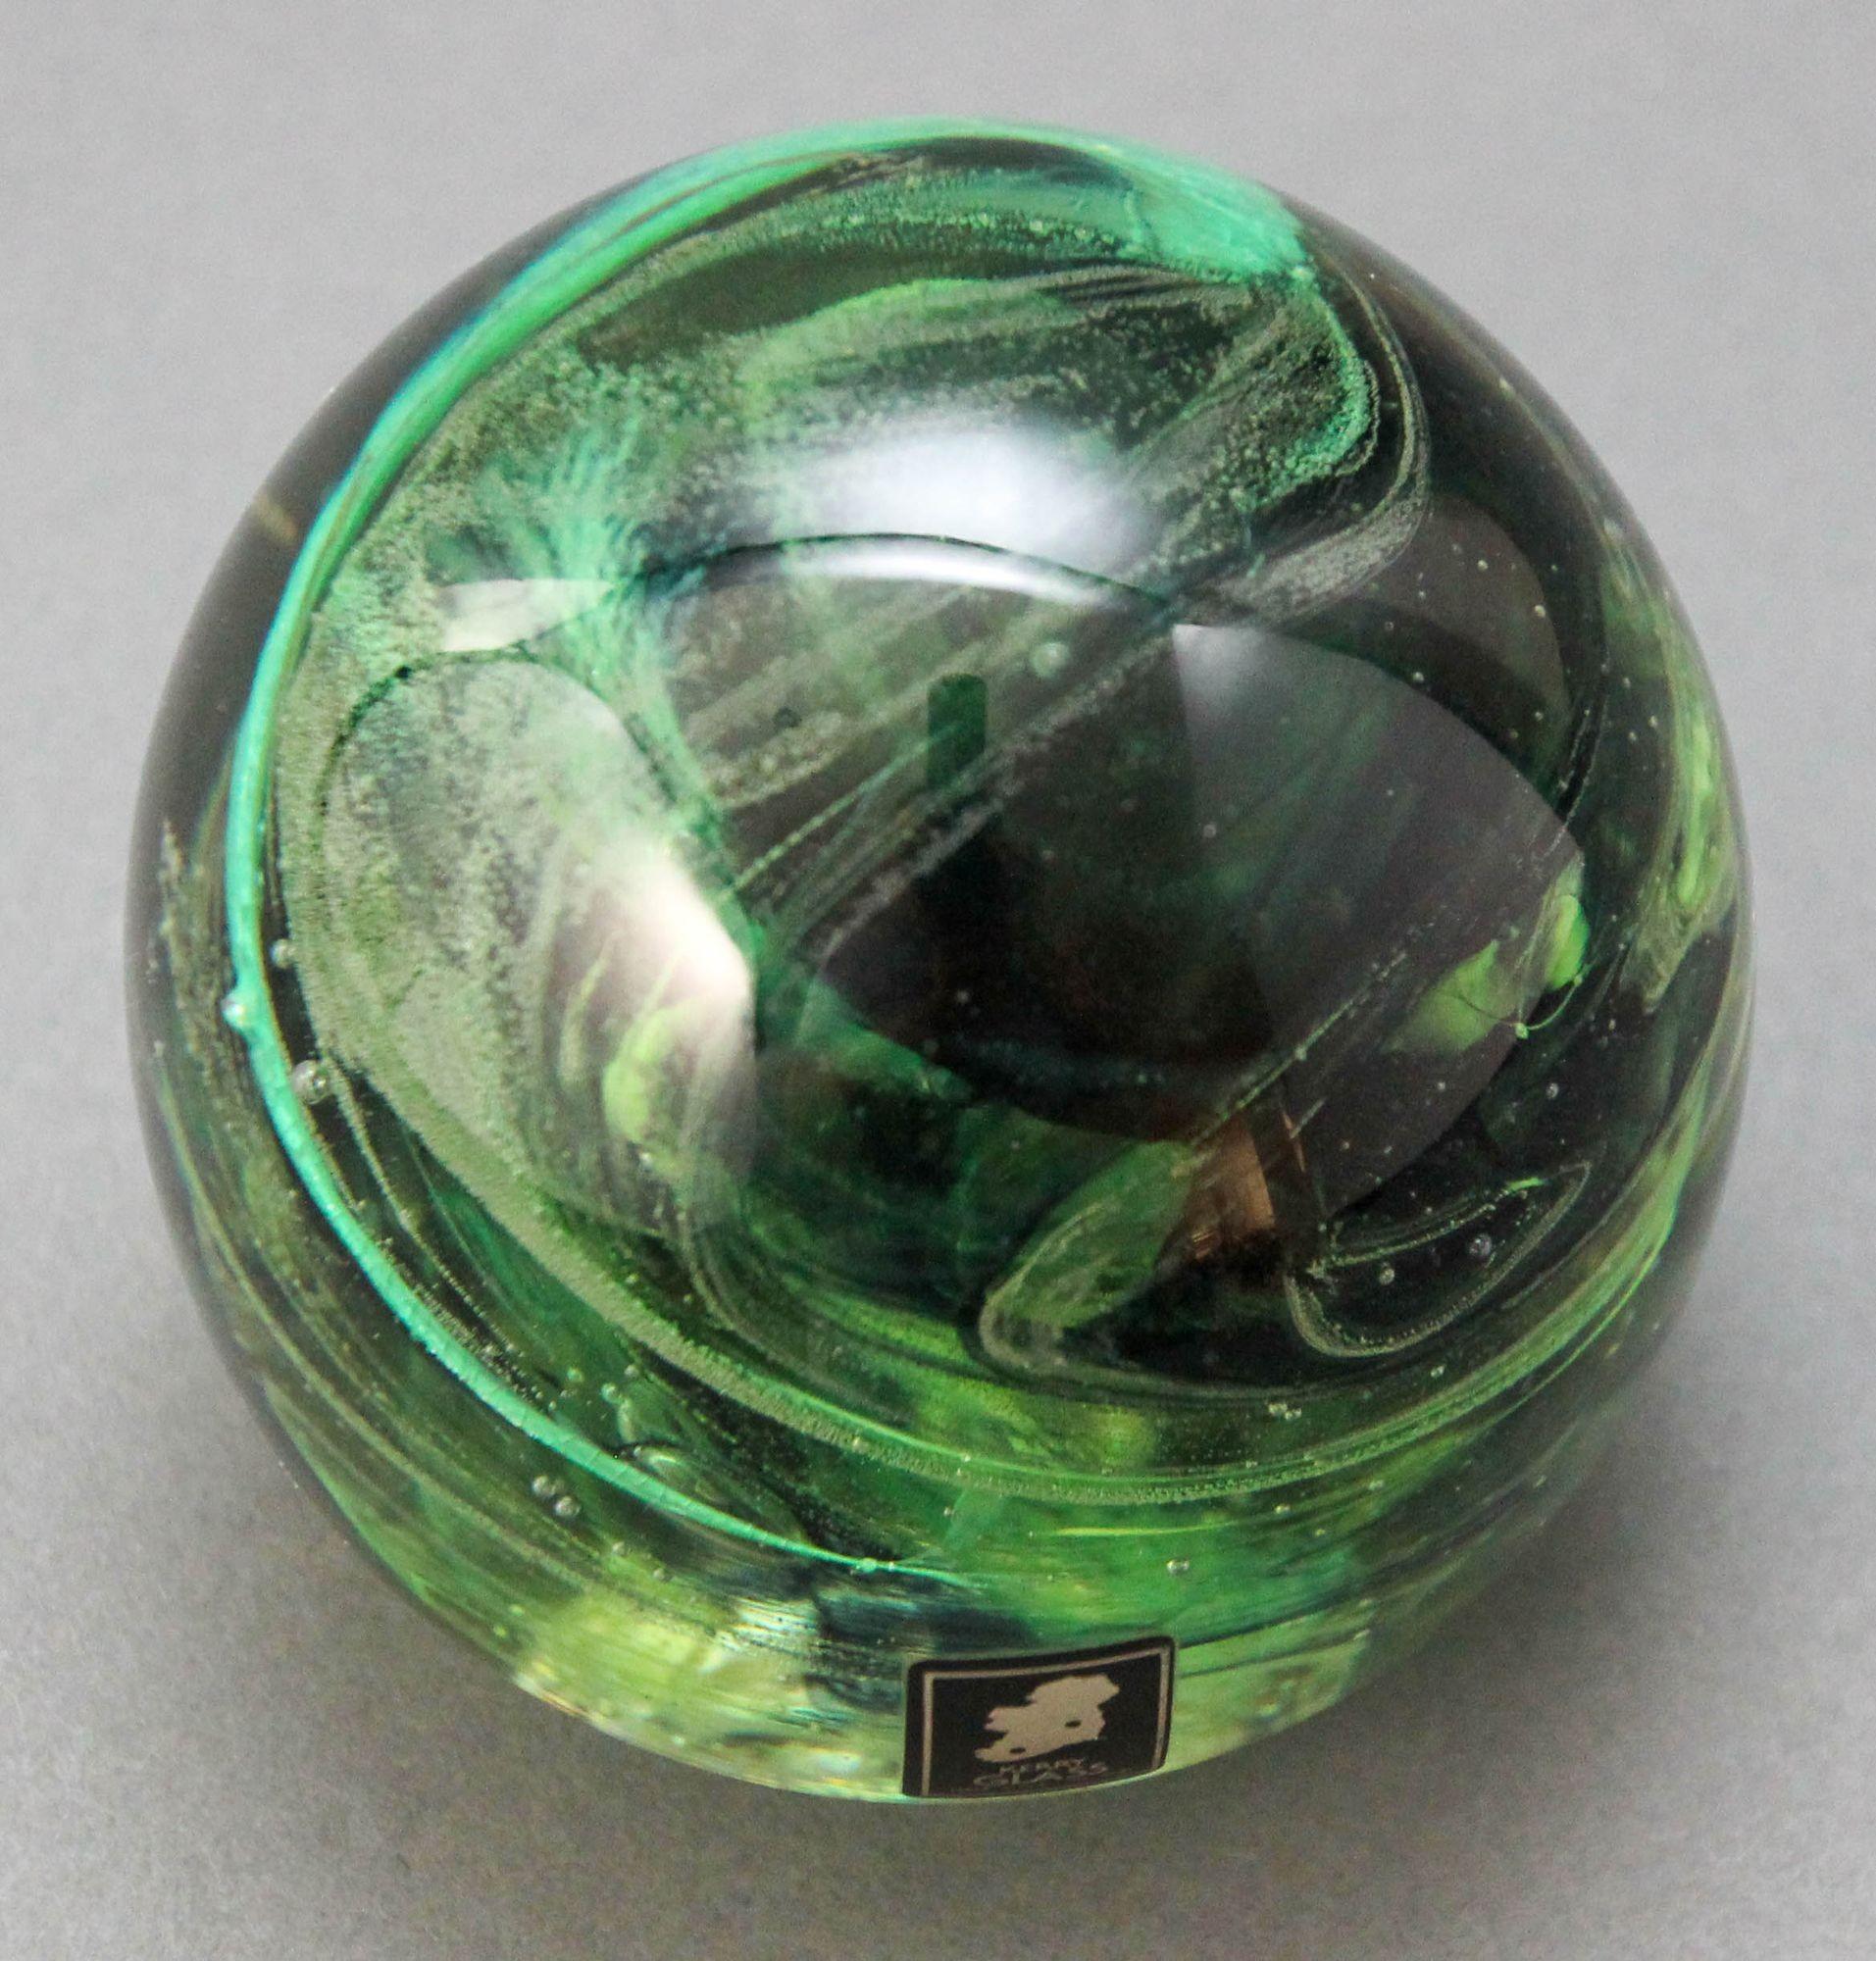 KERRY Irish Art Glass Paperweight Hand Blown in a Jade to Emerald Green 1980s In Good Condition For Sale In North Hollywood, CA